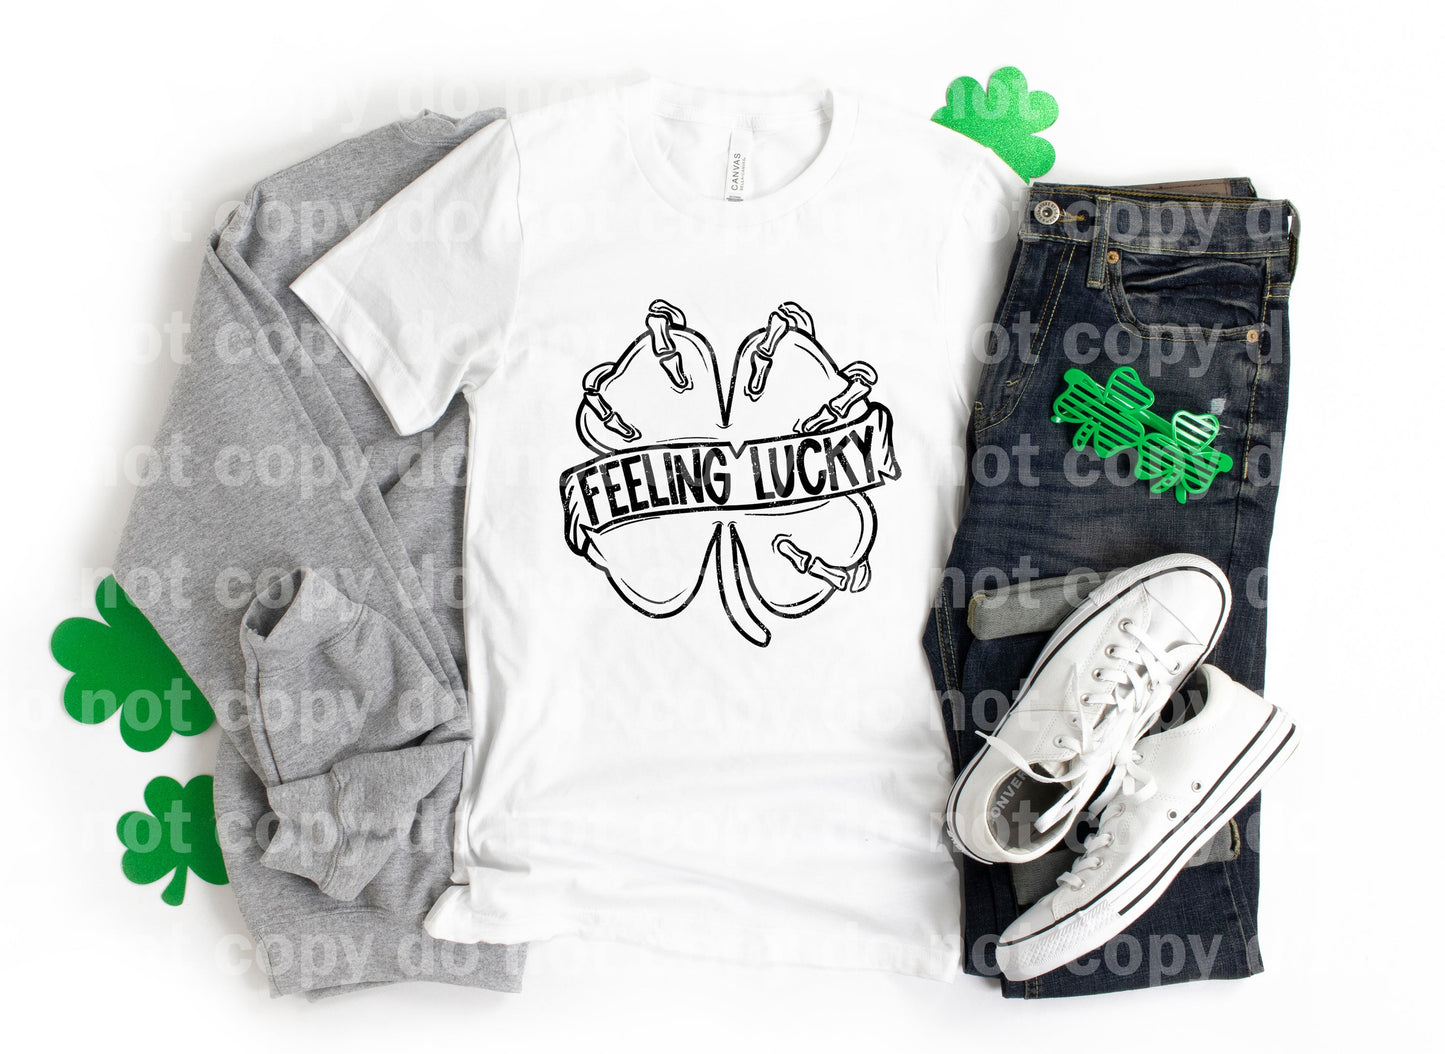 Feeling Lucky Distressed Full Color/One Color Dream Print or Sublimation Print